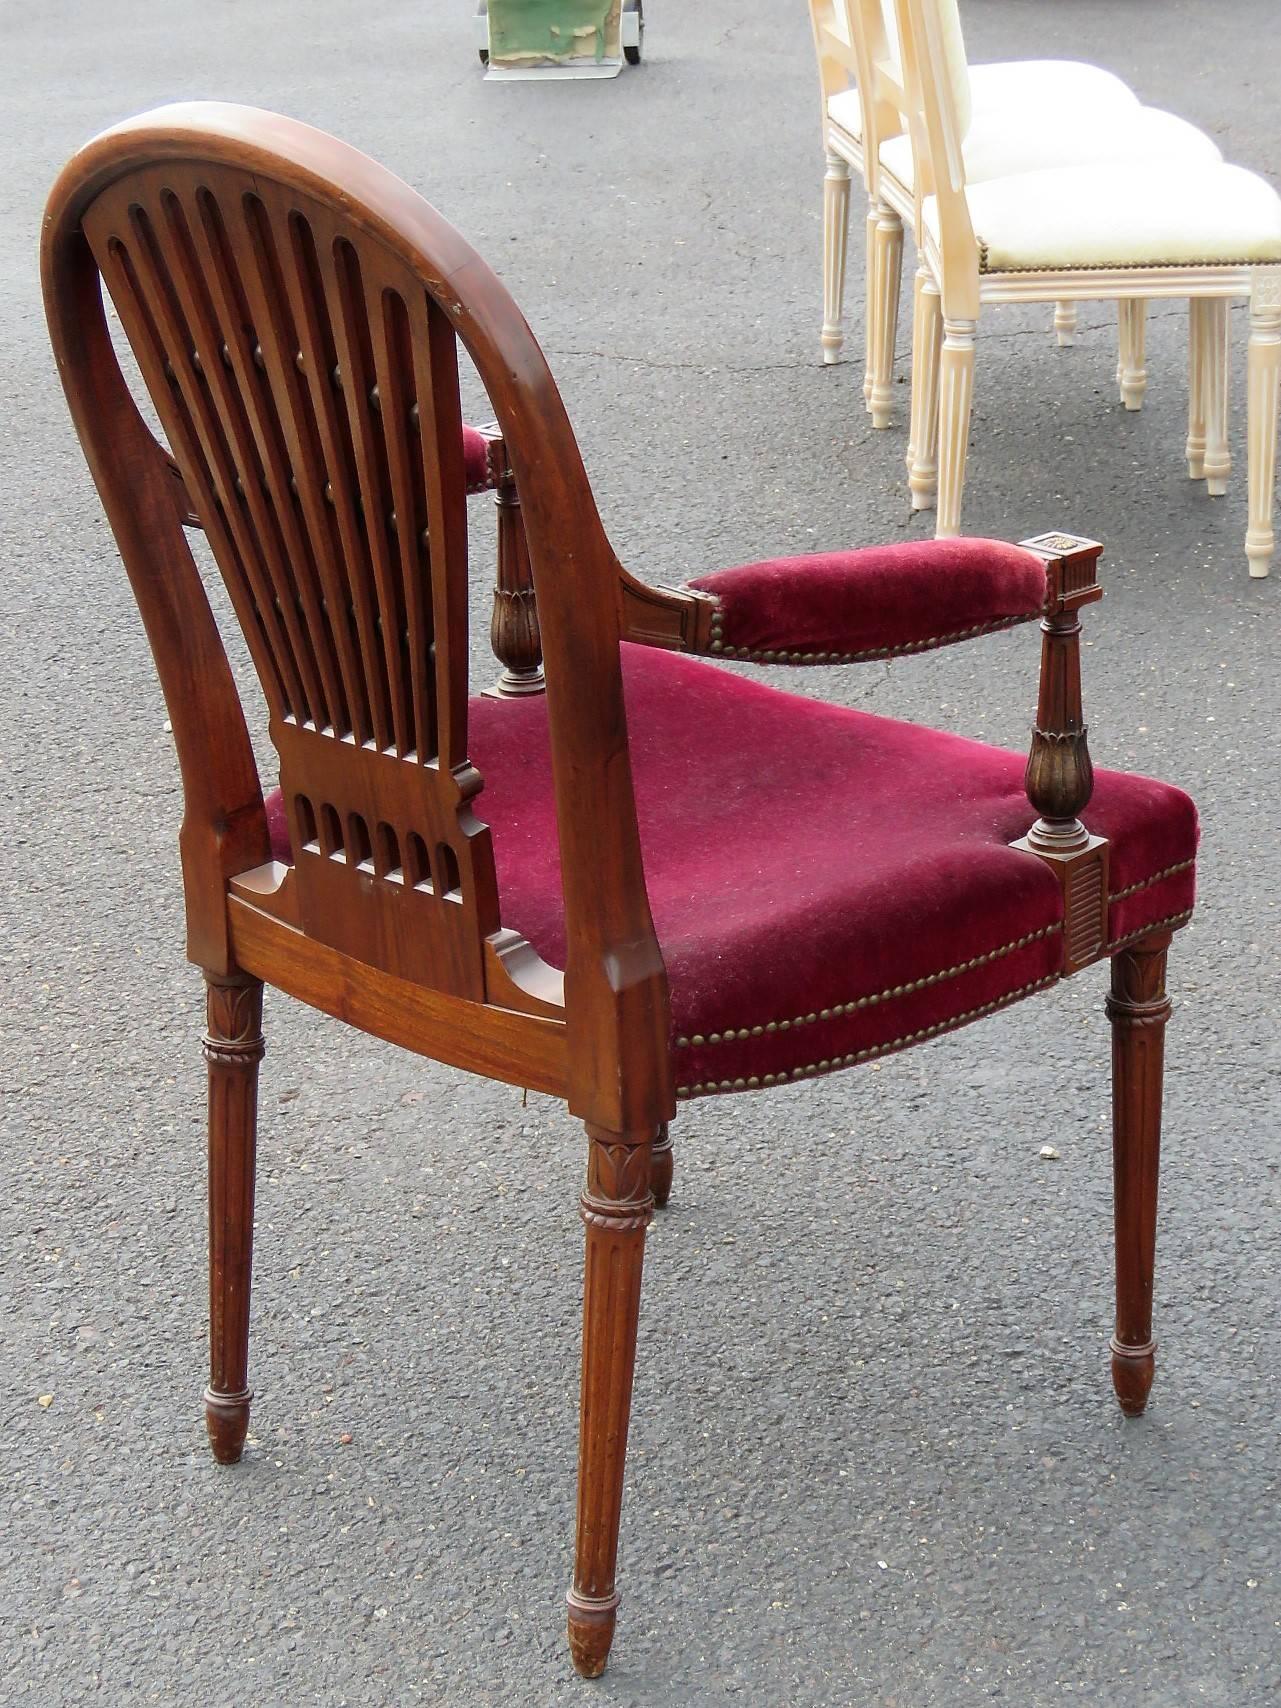 12 Jansen Directoire style walnut carved frame chairs. Red upholstered seats.